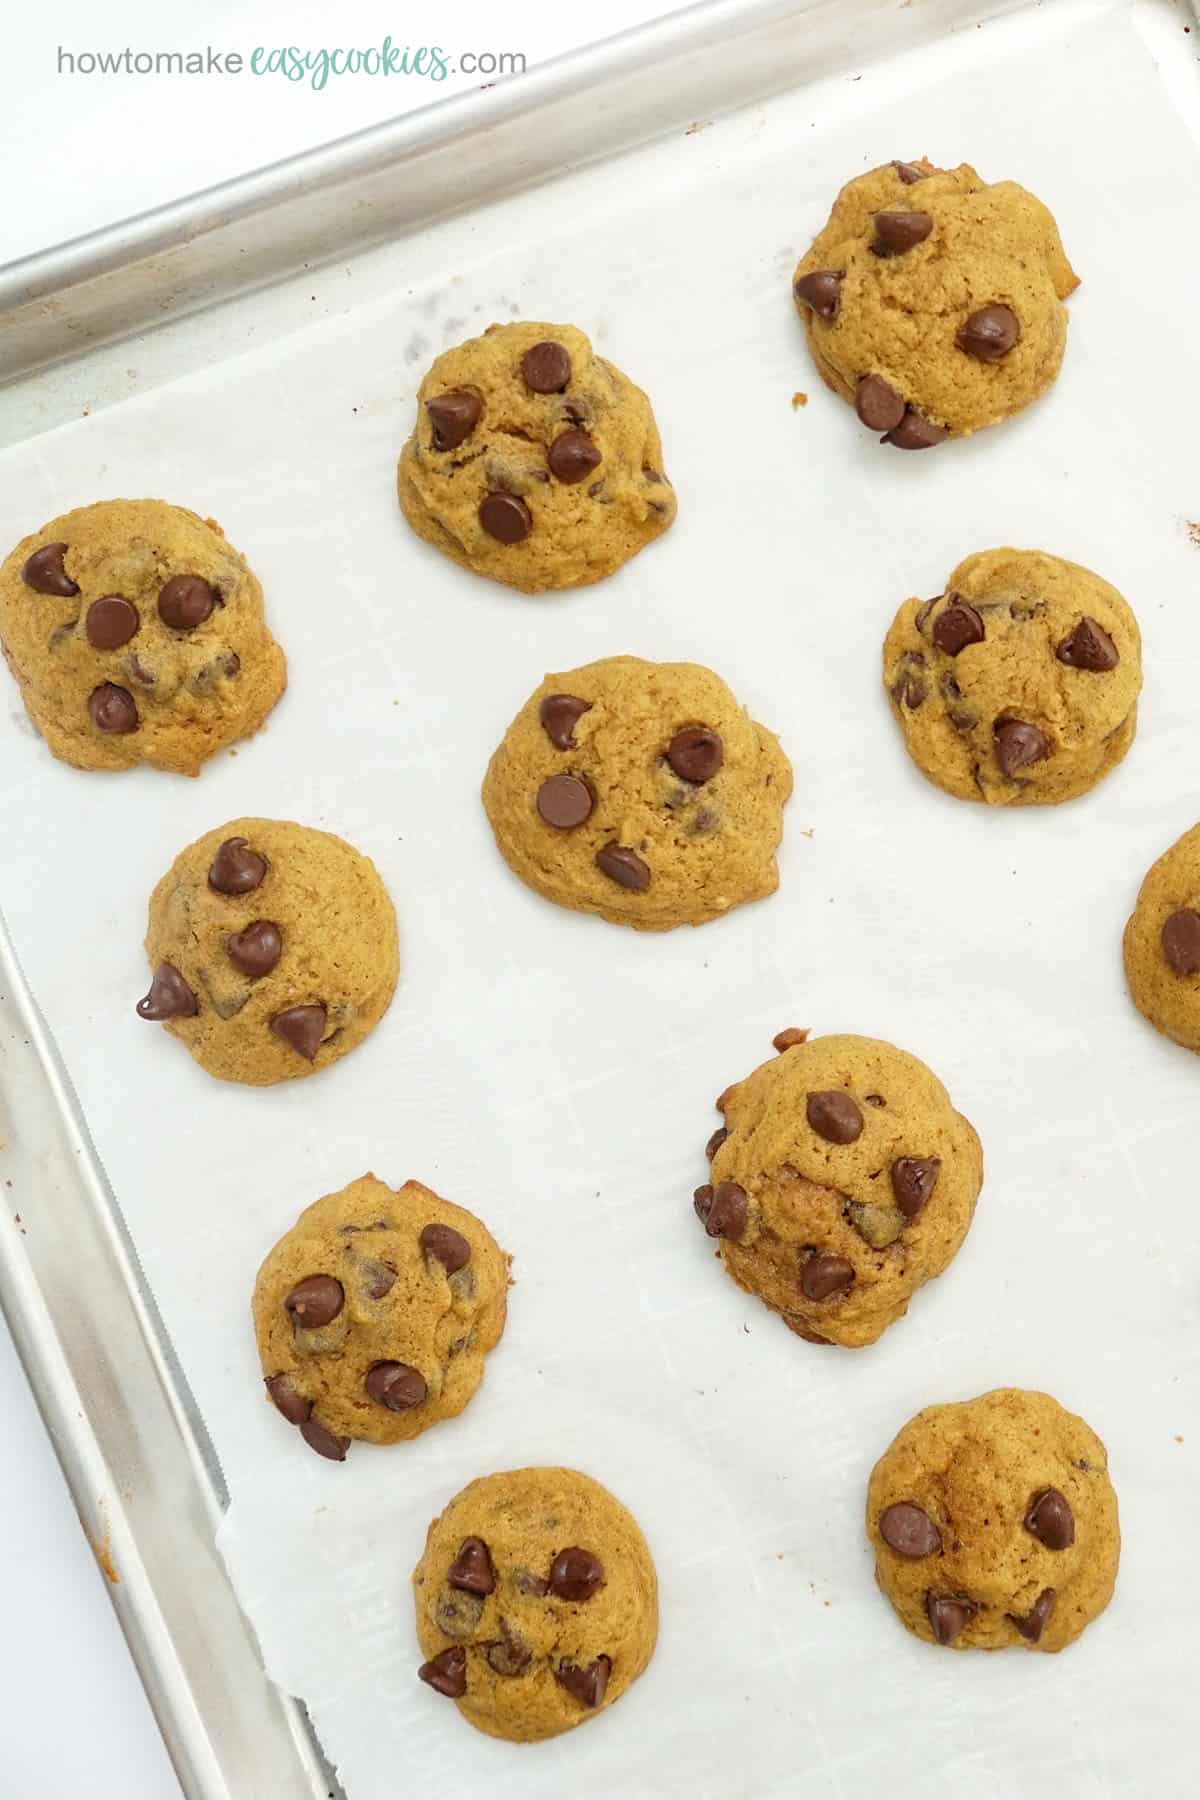 pumpkin chocolate chip cookies on baking tray